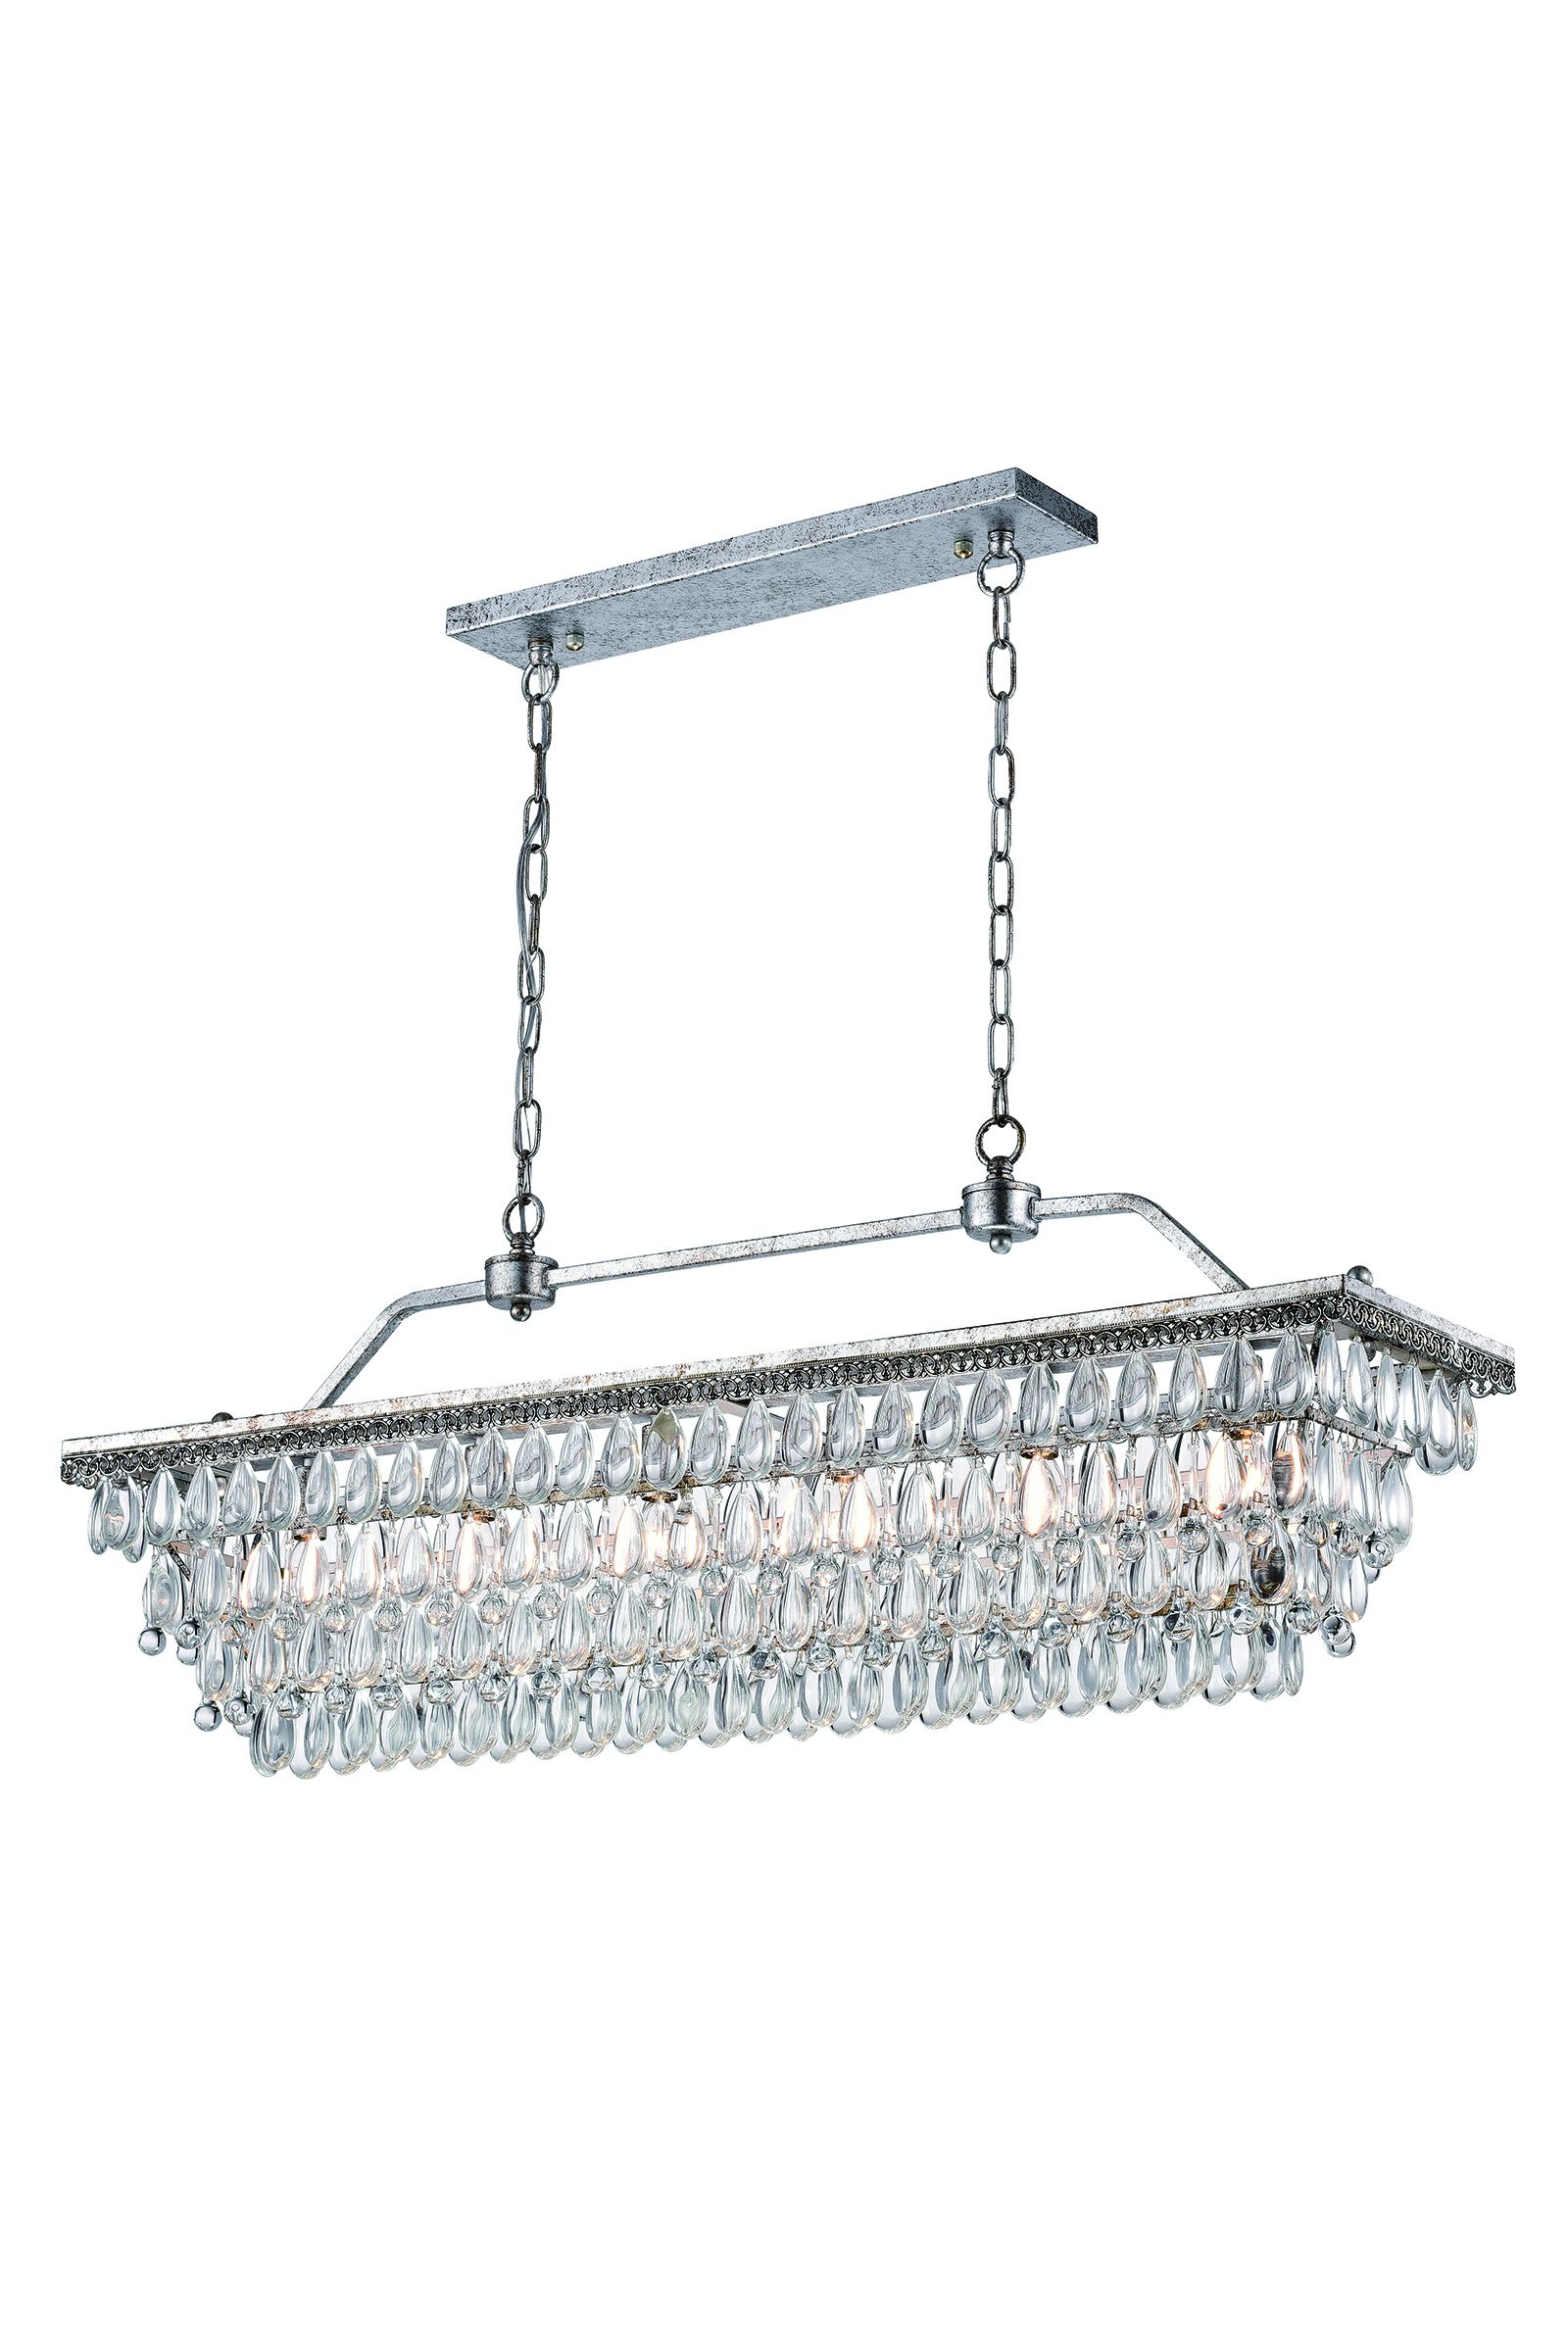 6 Light Antique Silver Rectangular Crystal Chandelier Intended For Four Light Antique Silver Chandeliers (View 15 of 15)